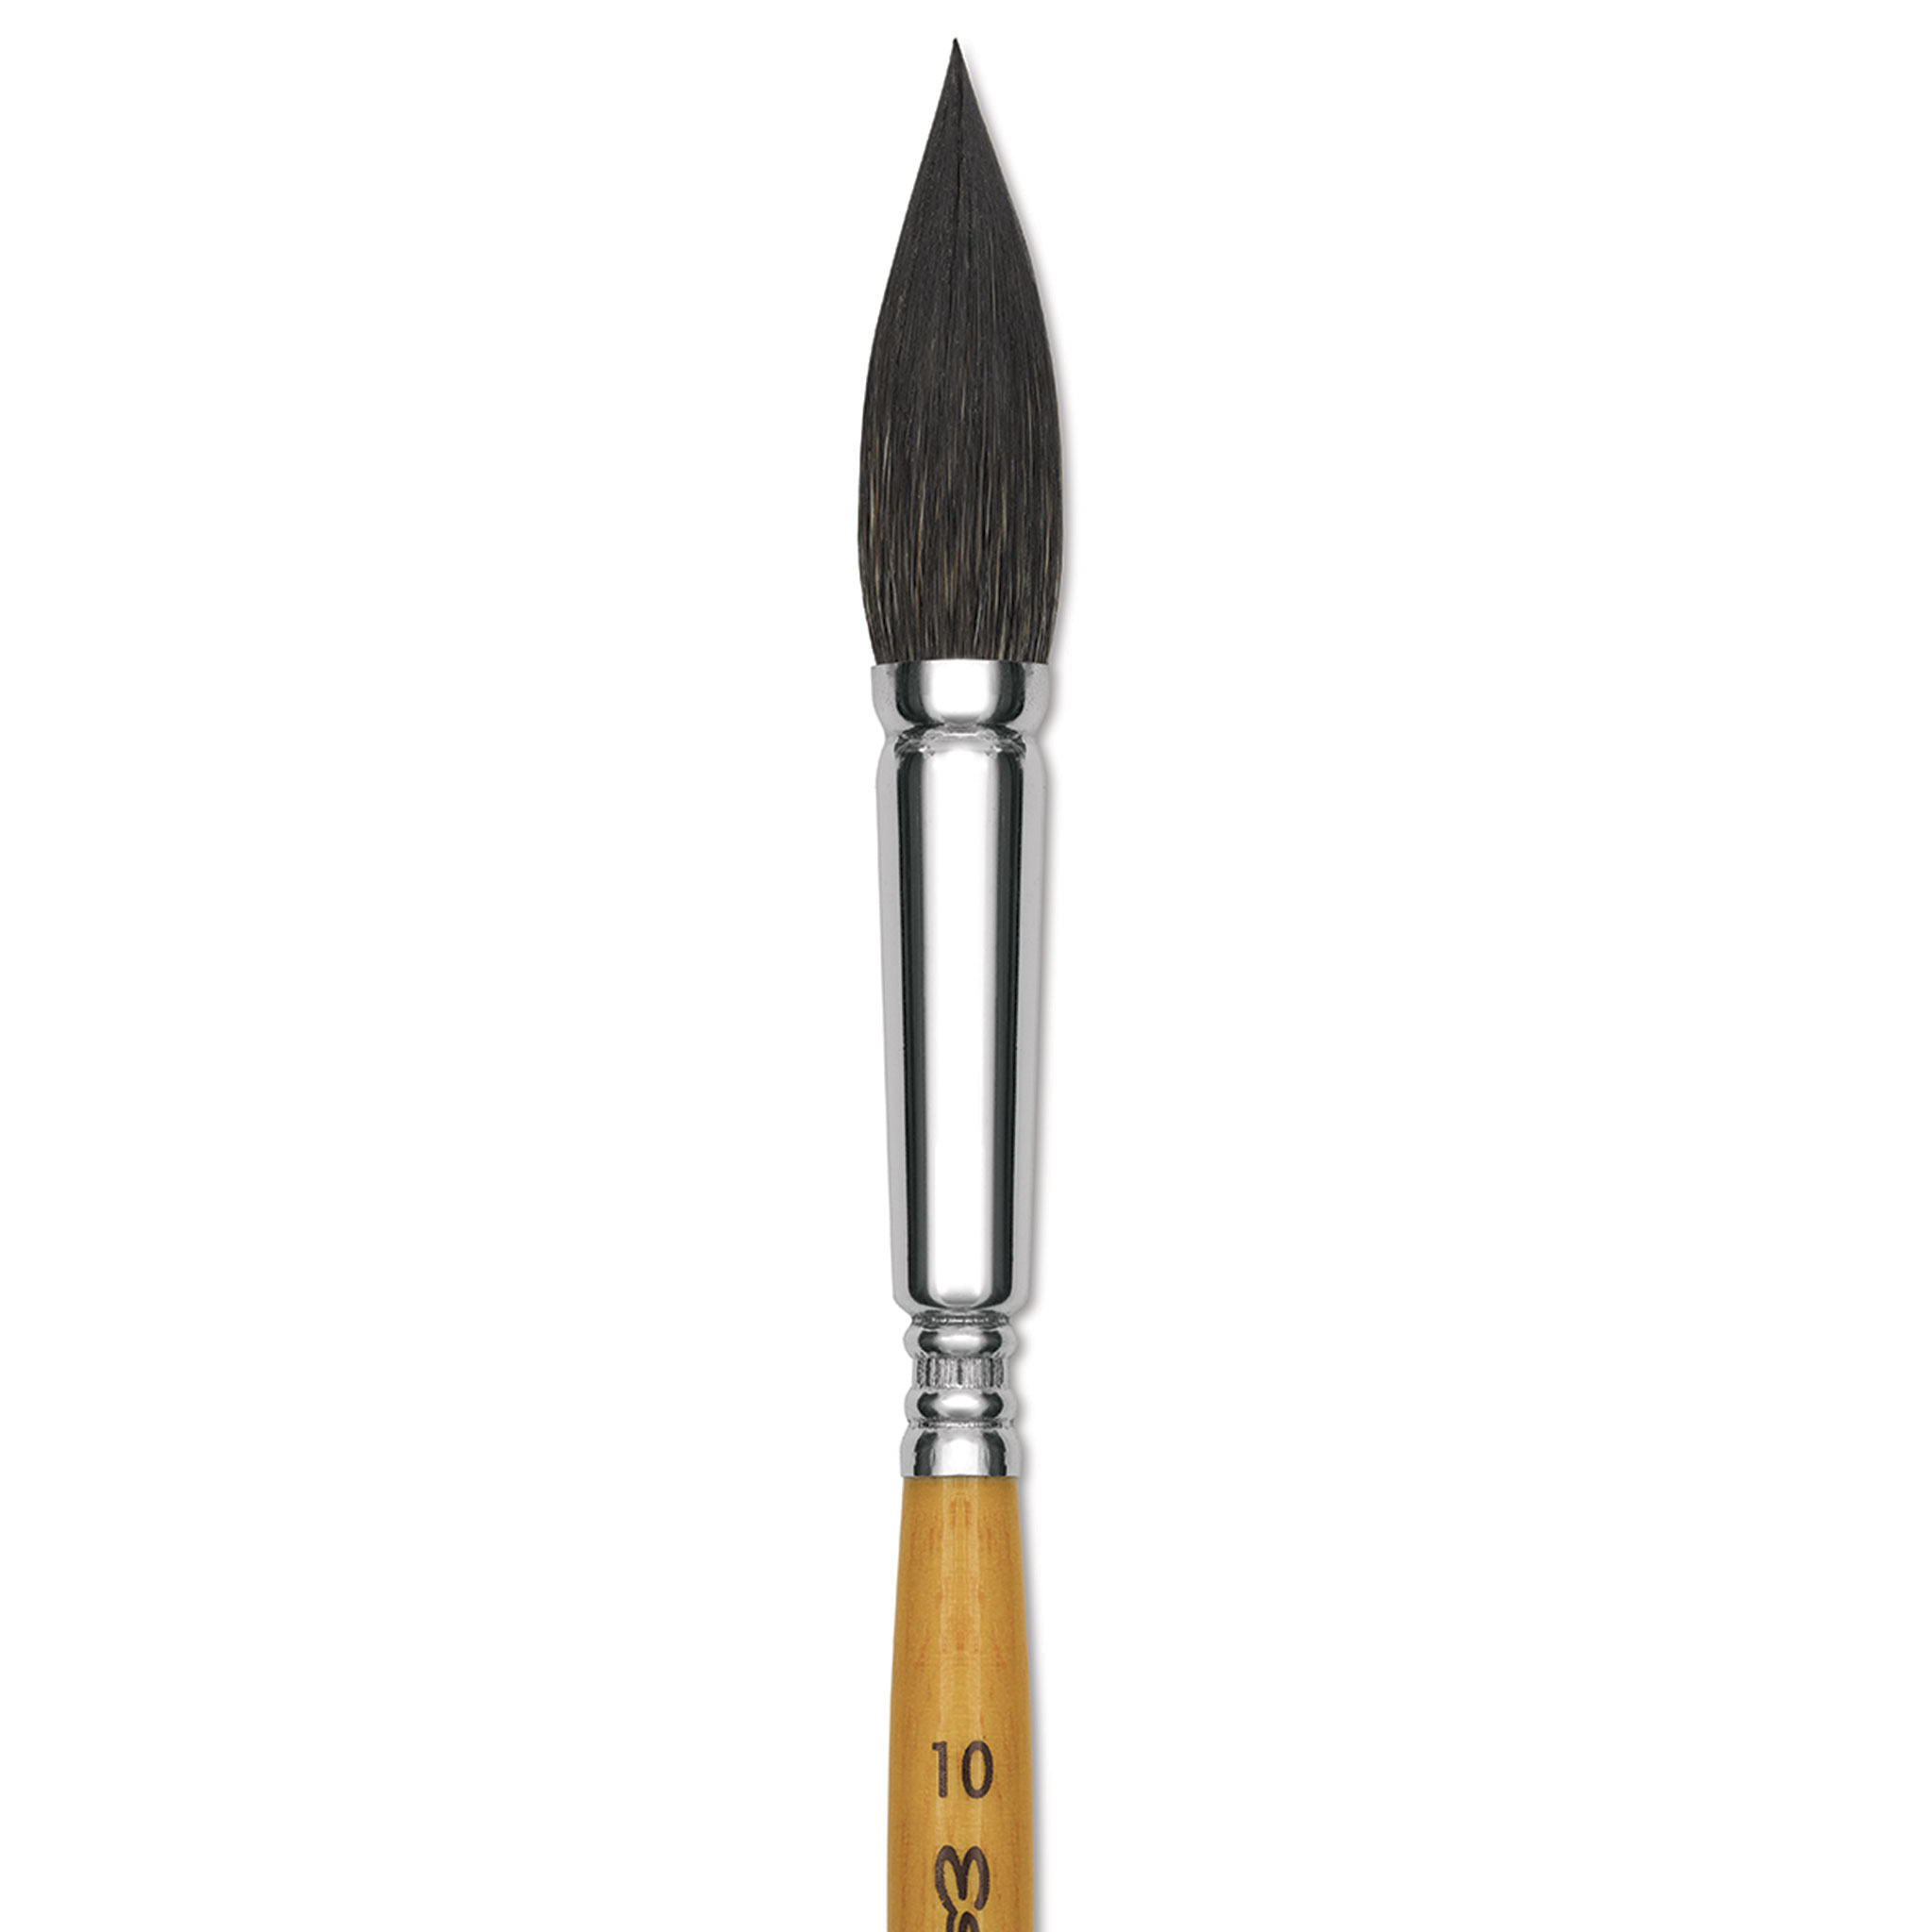 Specialty brushes by Escoda - Brushes and More